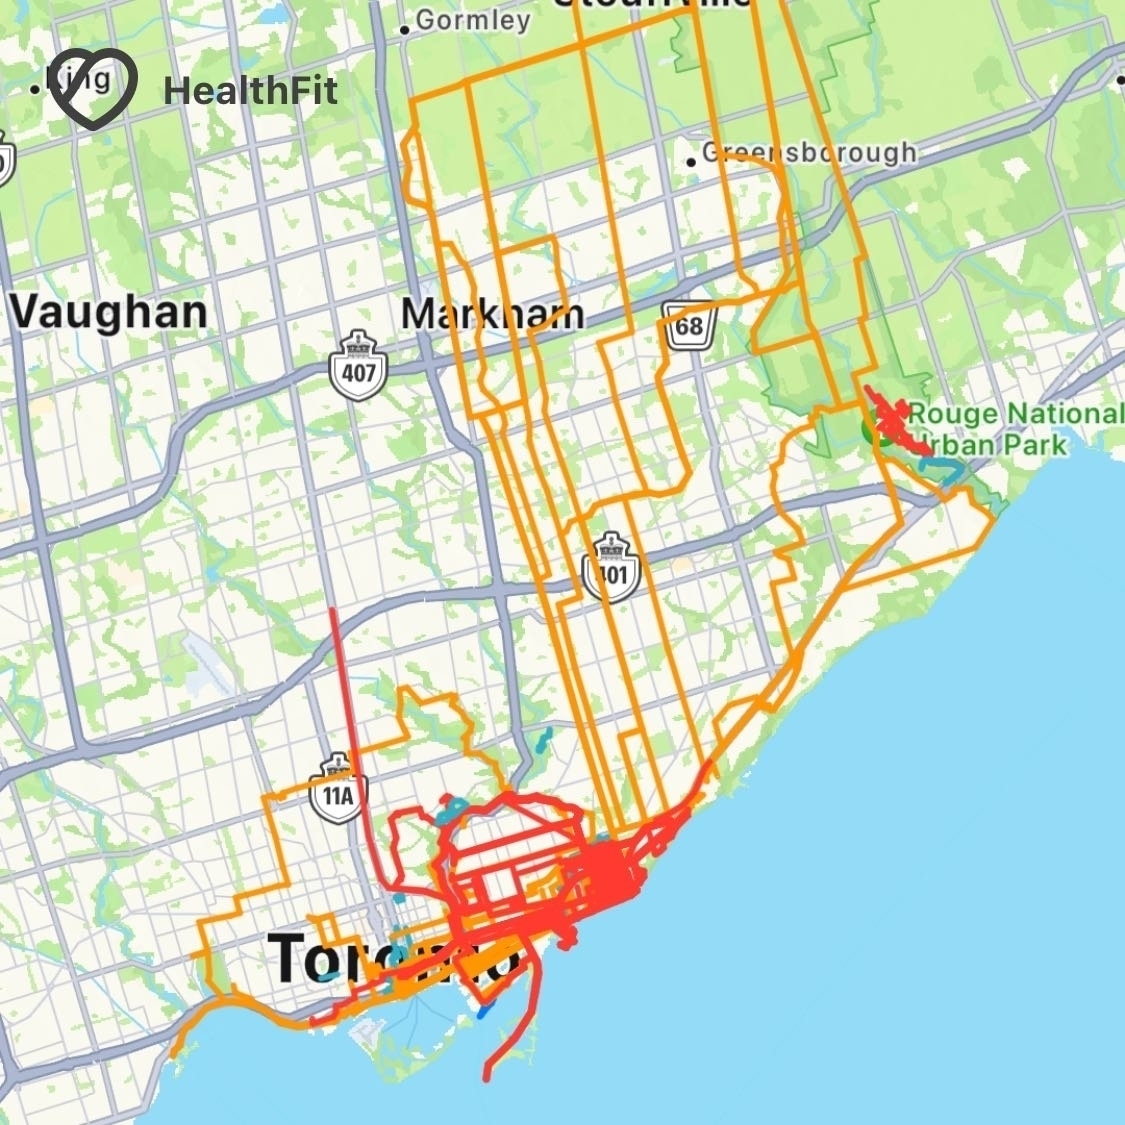 Heat map of workouts in the Toronto area